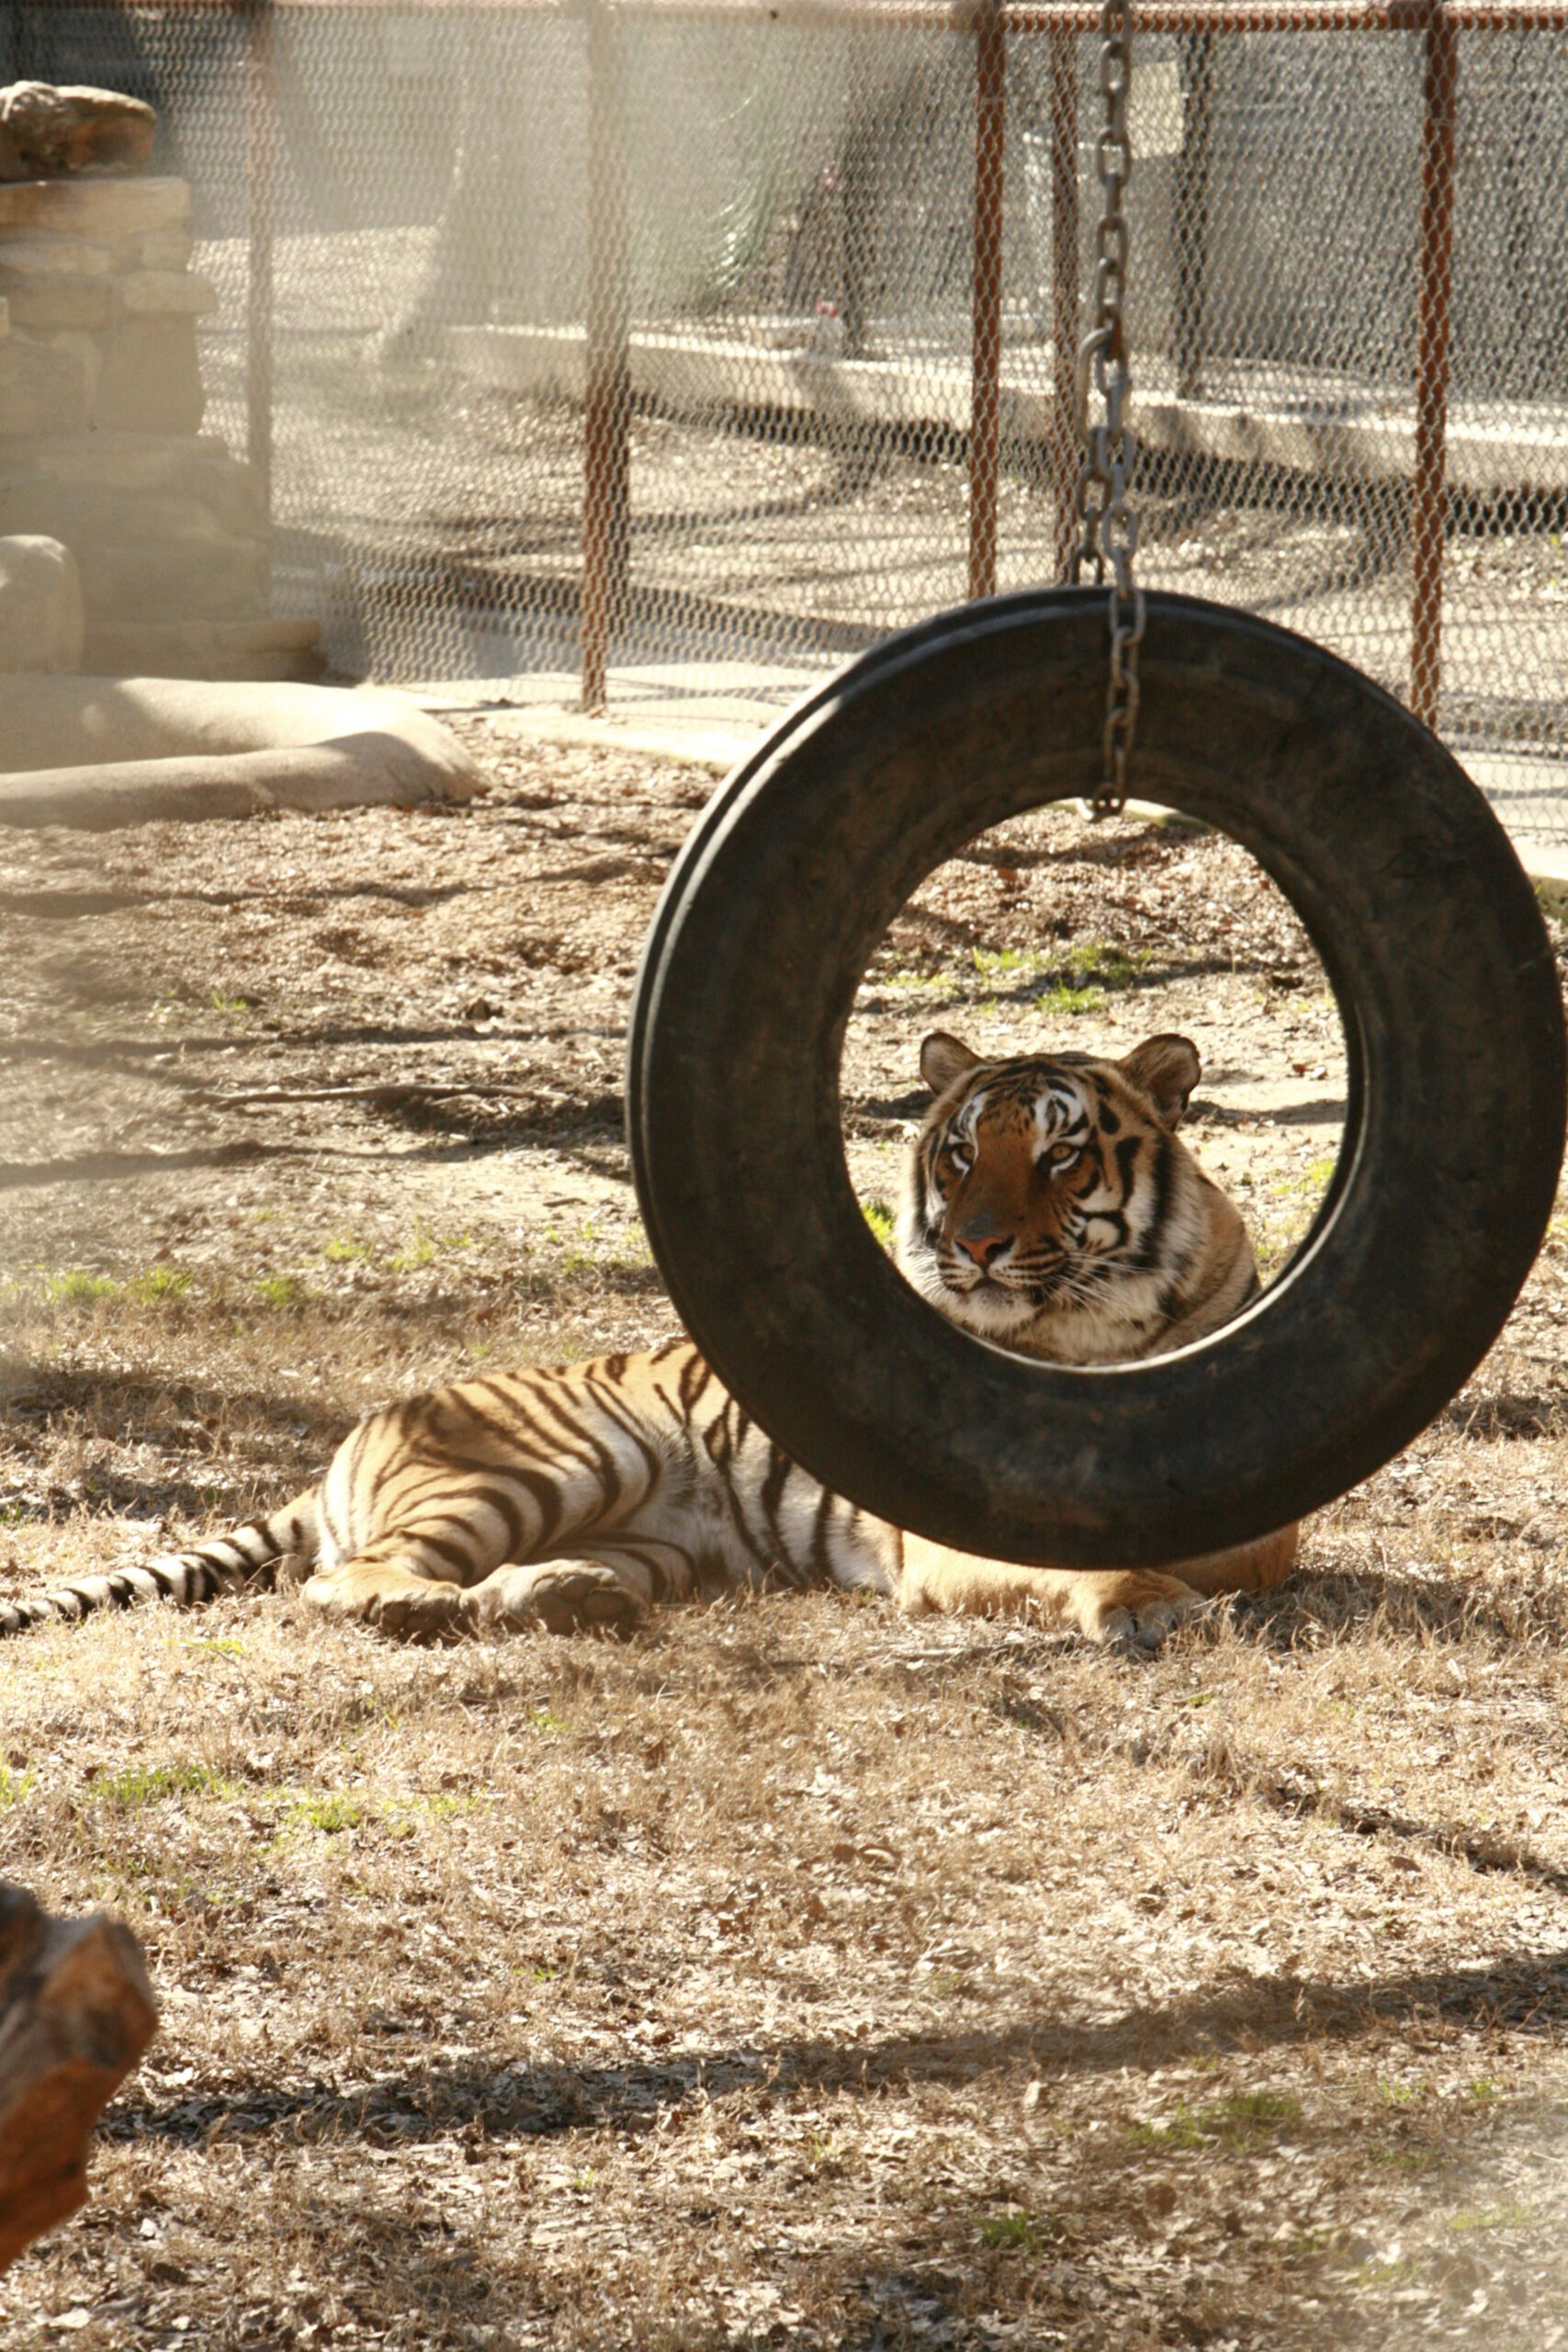 sultan looking through the tire